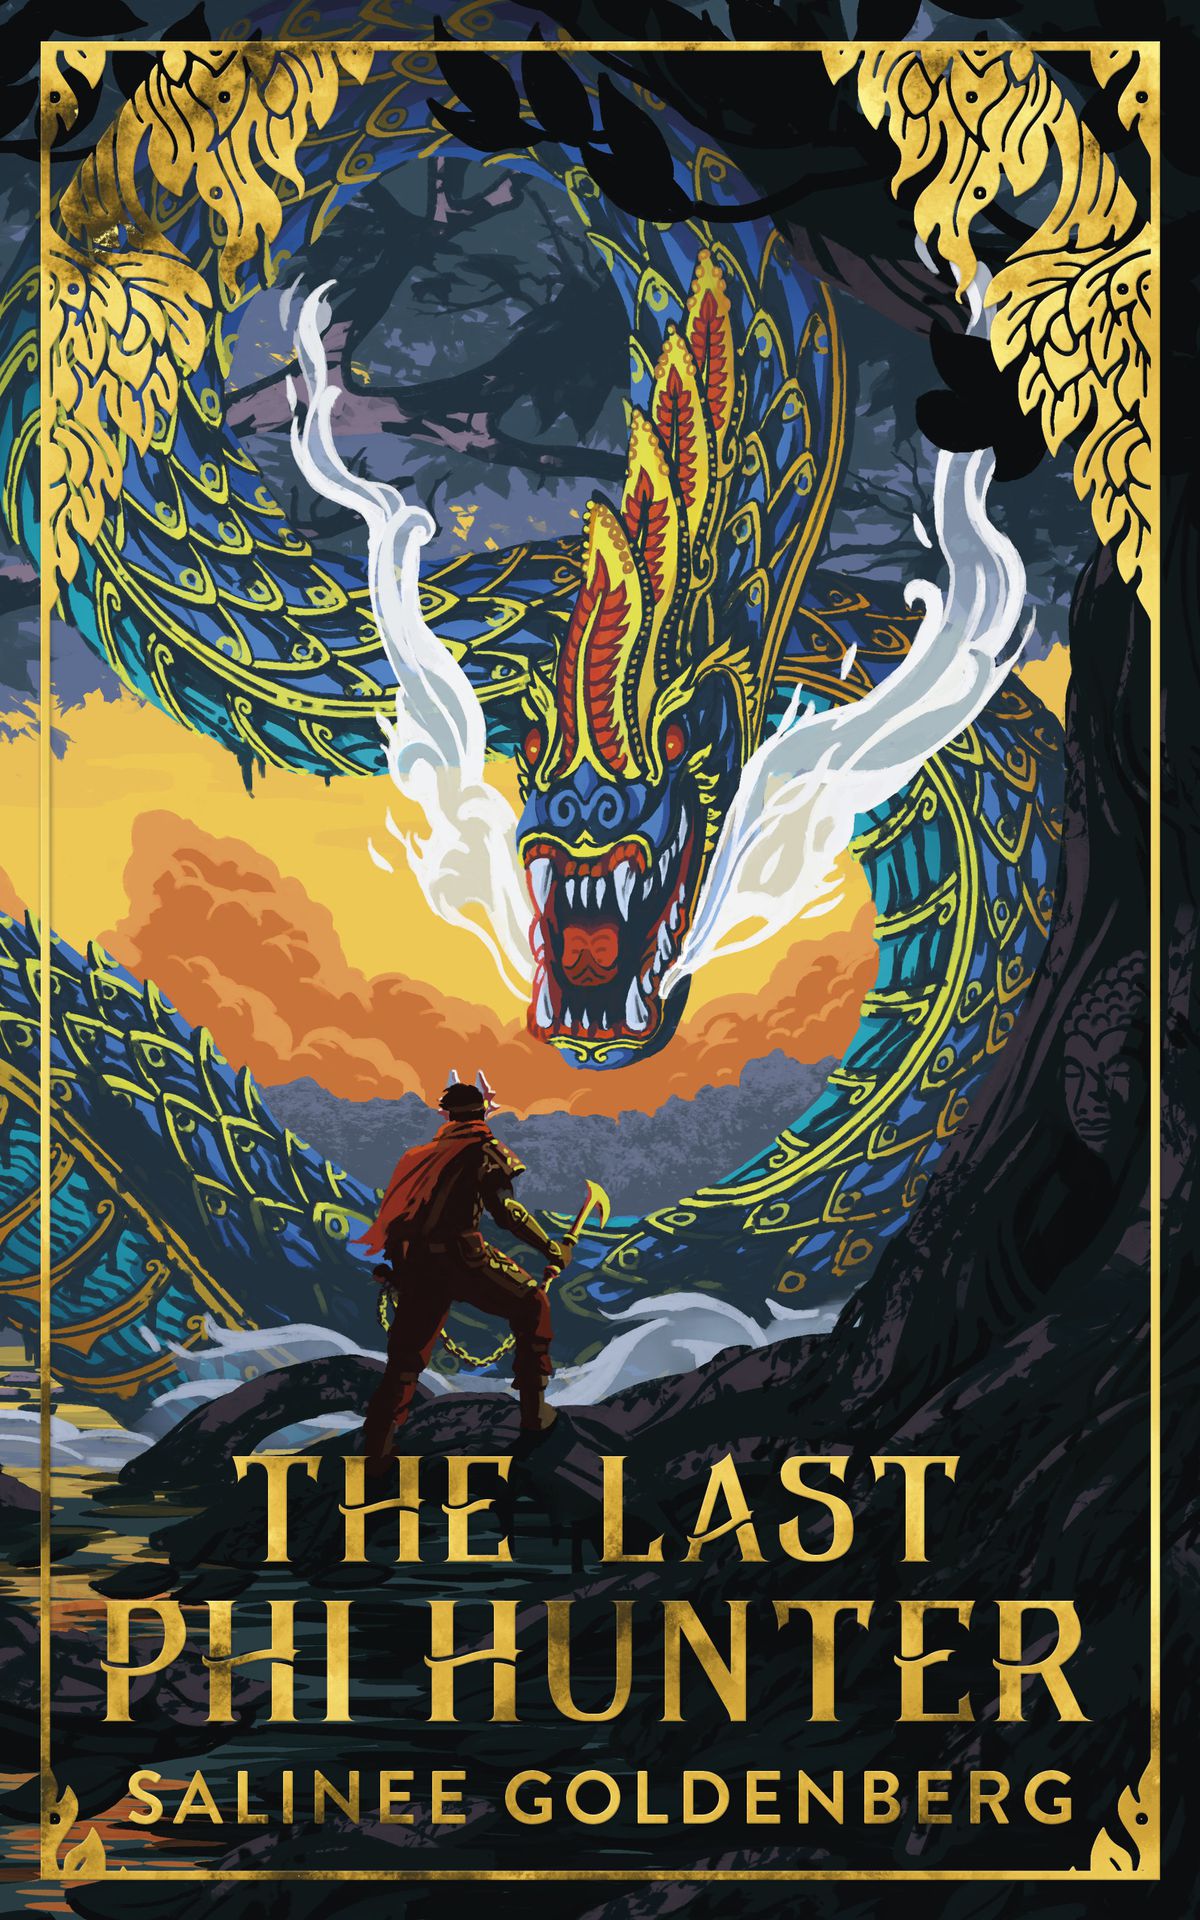 The Last Phi Hunter’s cover shows a man facing off against what looks like a giant dragon.